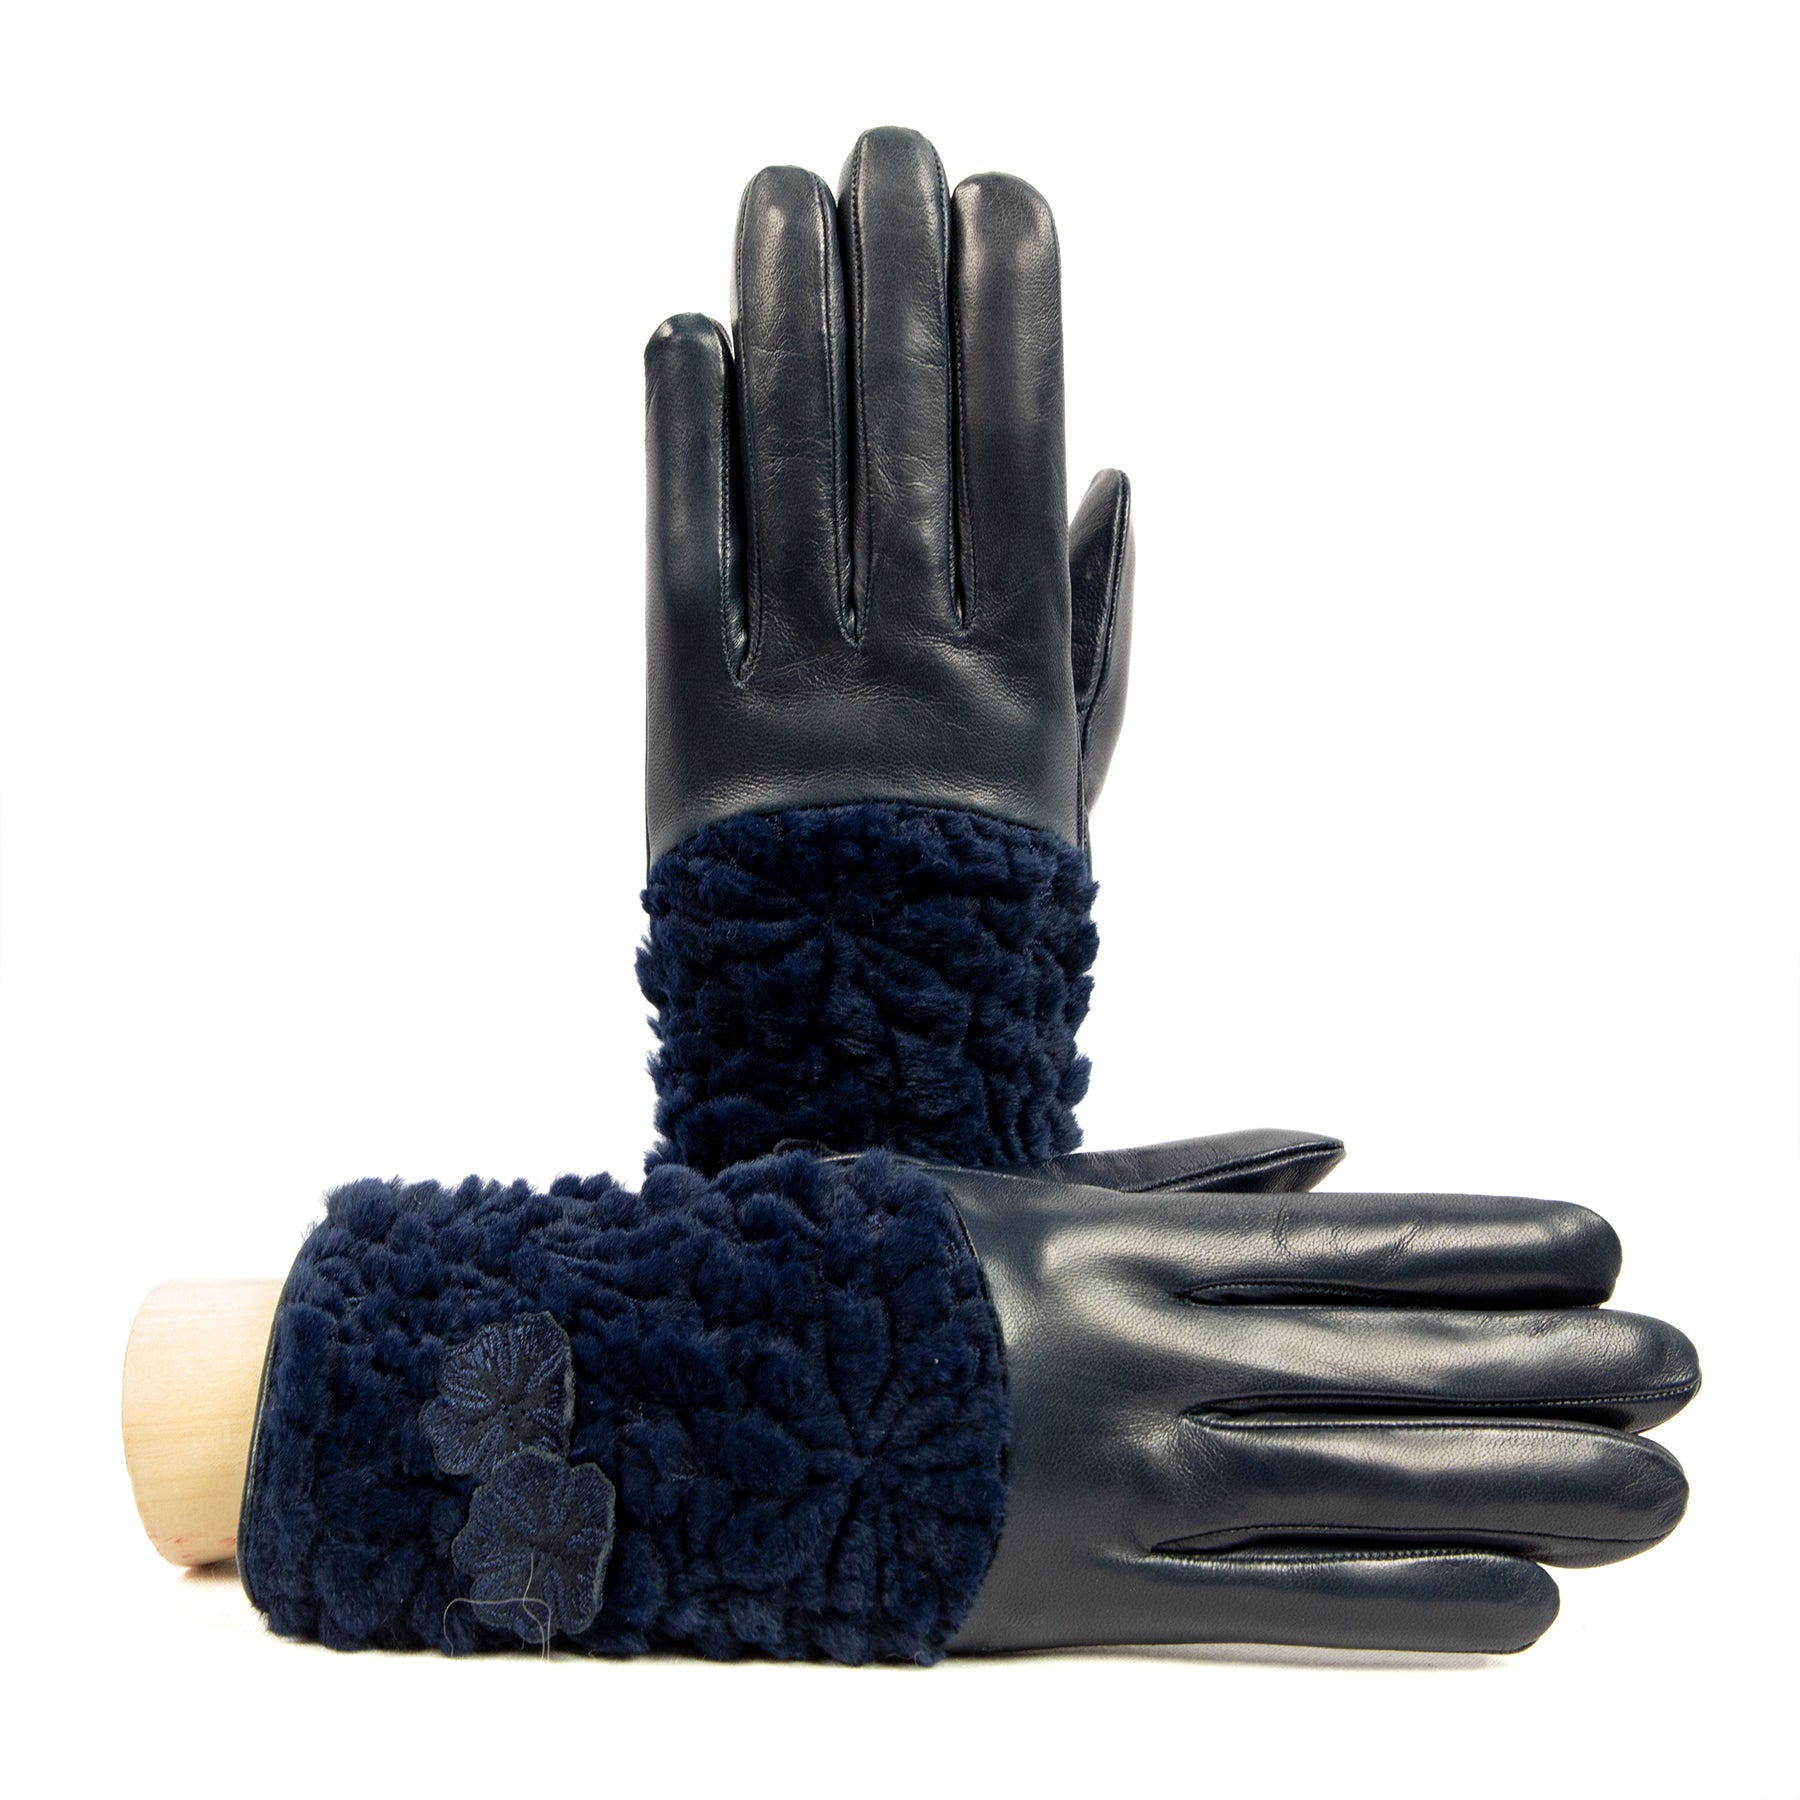 Women's blue nappa leather gloves with floral embroidered fur on top